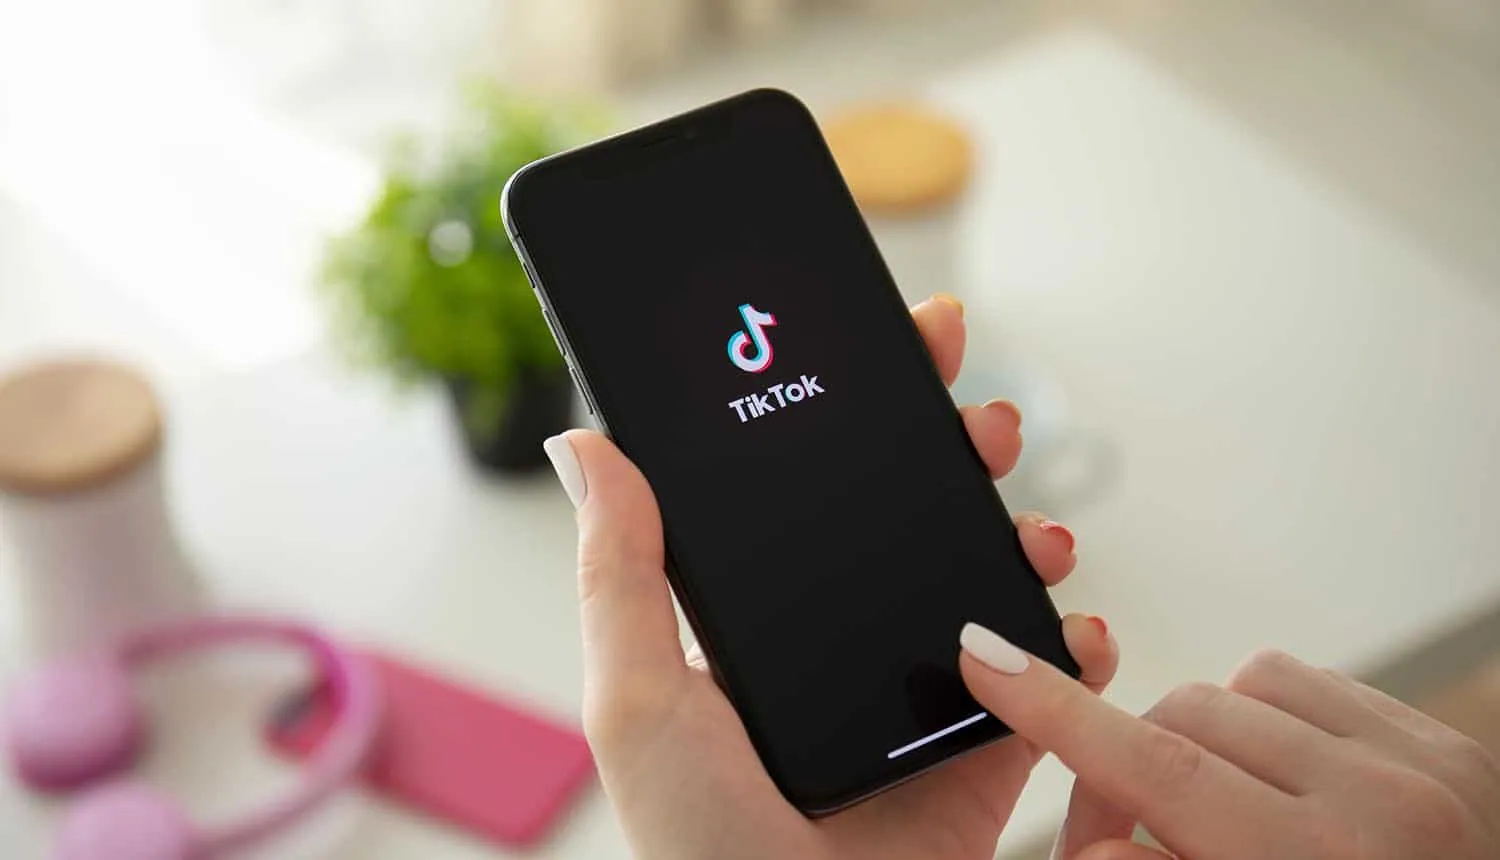 Why Does Tiktok Use So Much Storage? Reason & Fixes Here!